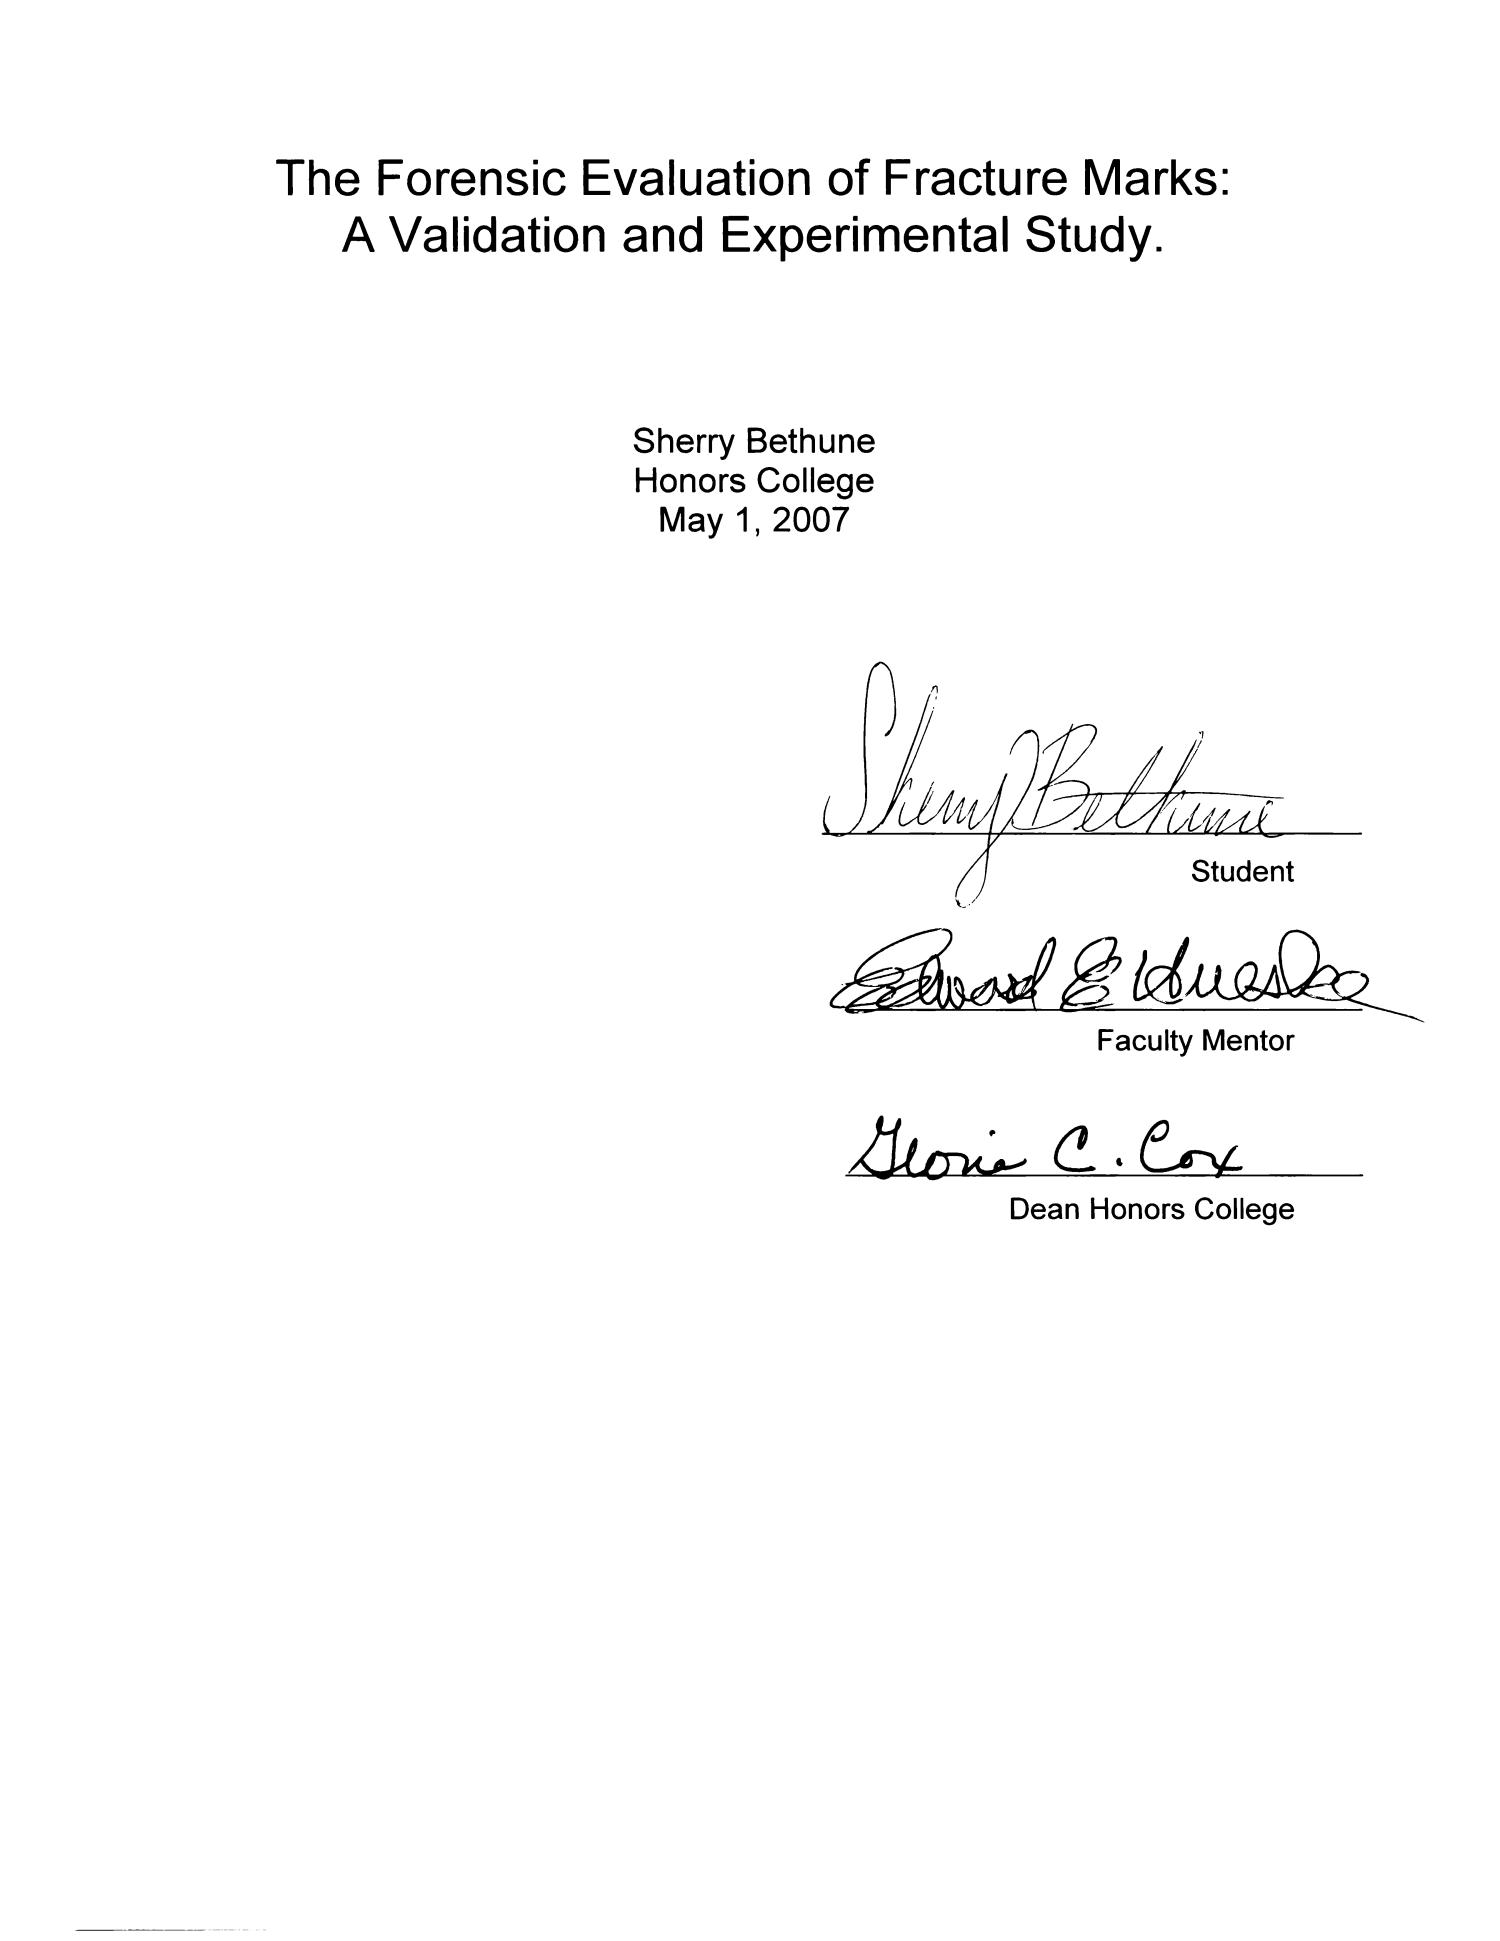 The Forensic Evaluation of Fracture Marks: A Validation and Experimental Study.
                                                
                                                    Title Page
                                                